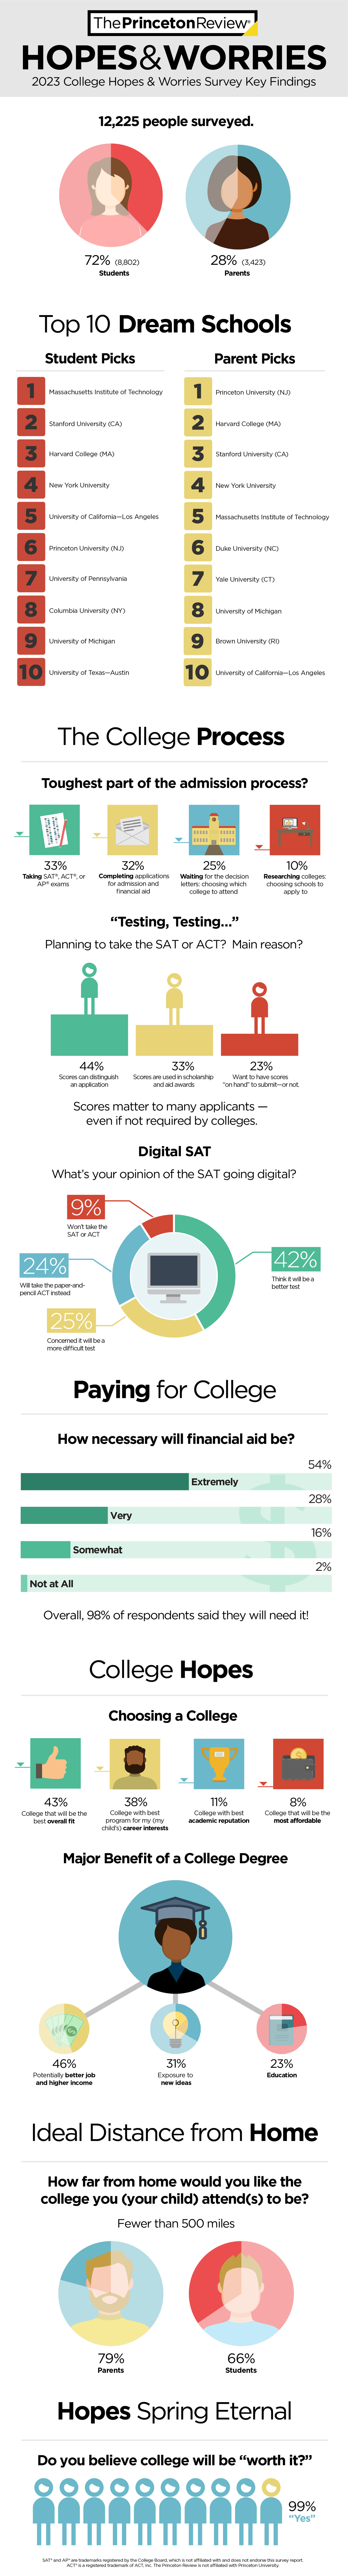 2023 College Hopes & Worries Infographic